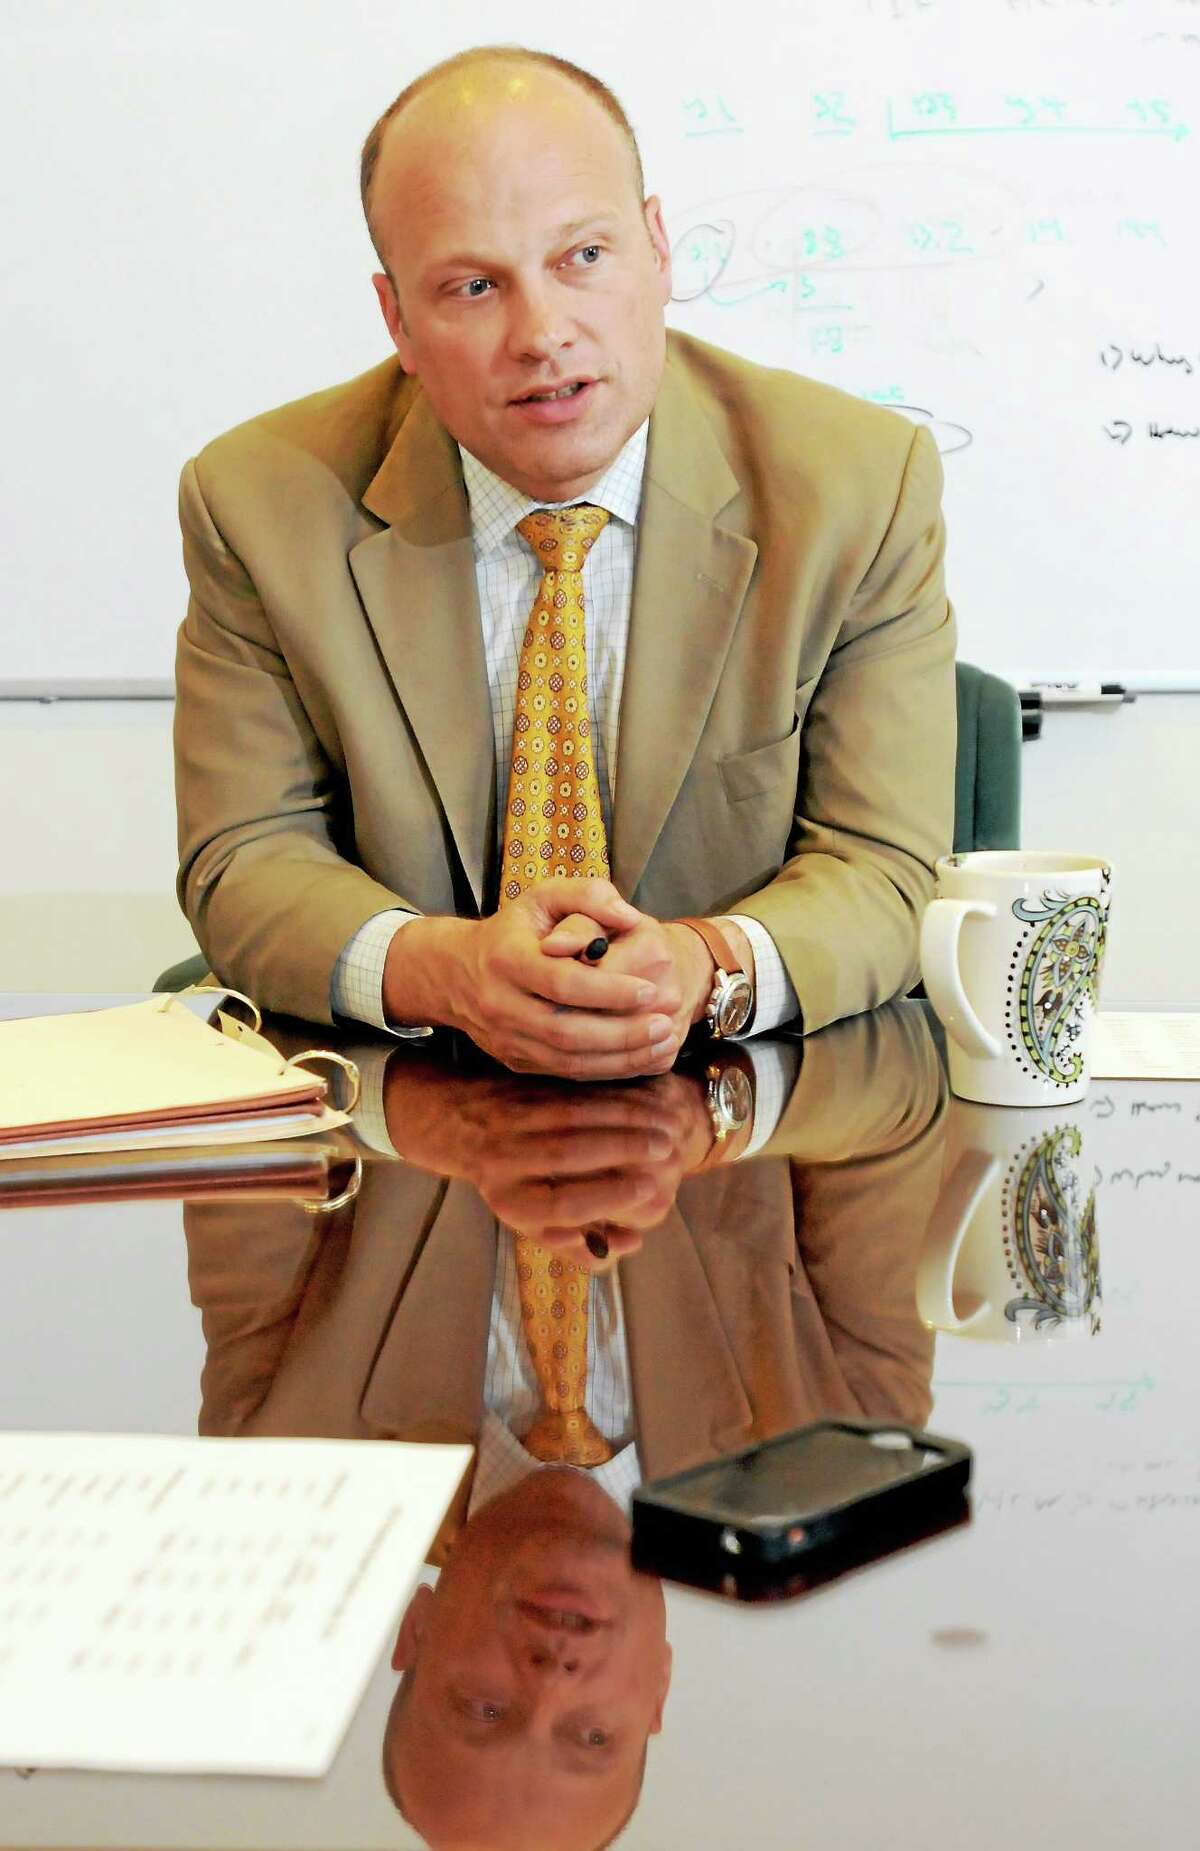 (Peter Hvizdak - New Haven Register) Garth Harries, New Haven Superintendent of Schools, in his office Friday, May 30, 2014, addressing budget gap concerns.